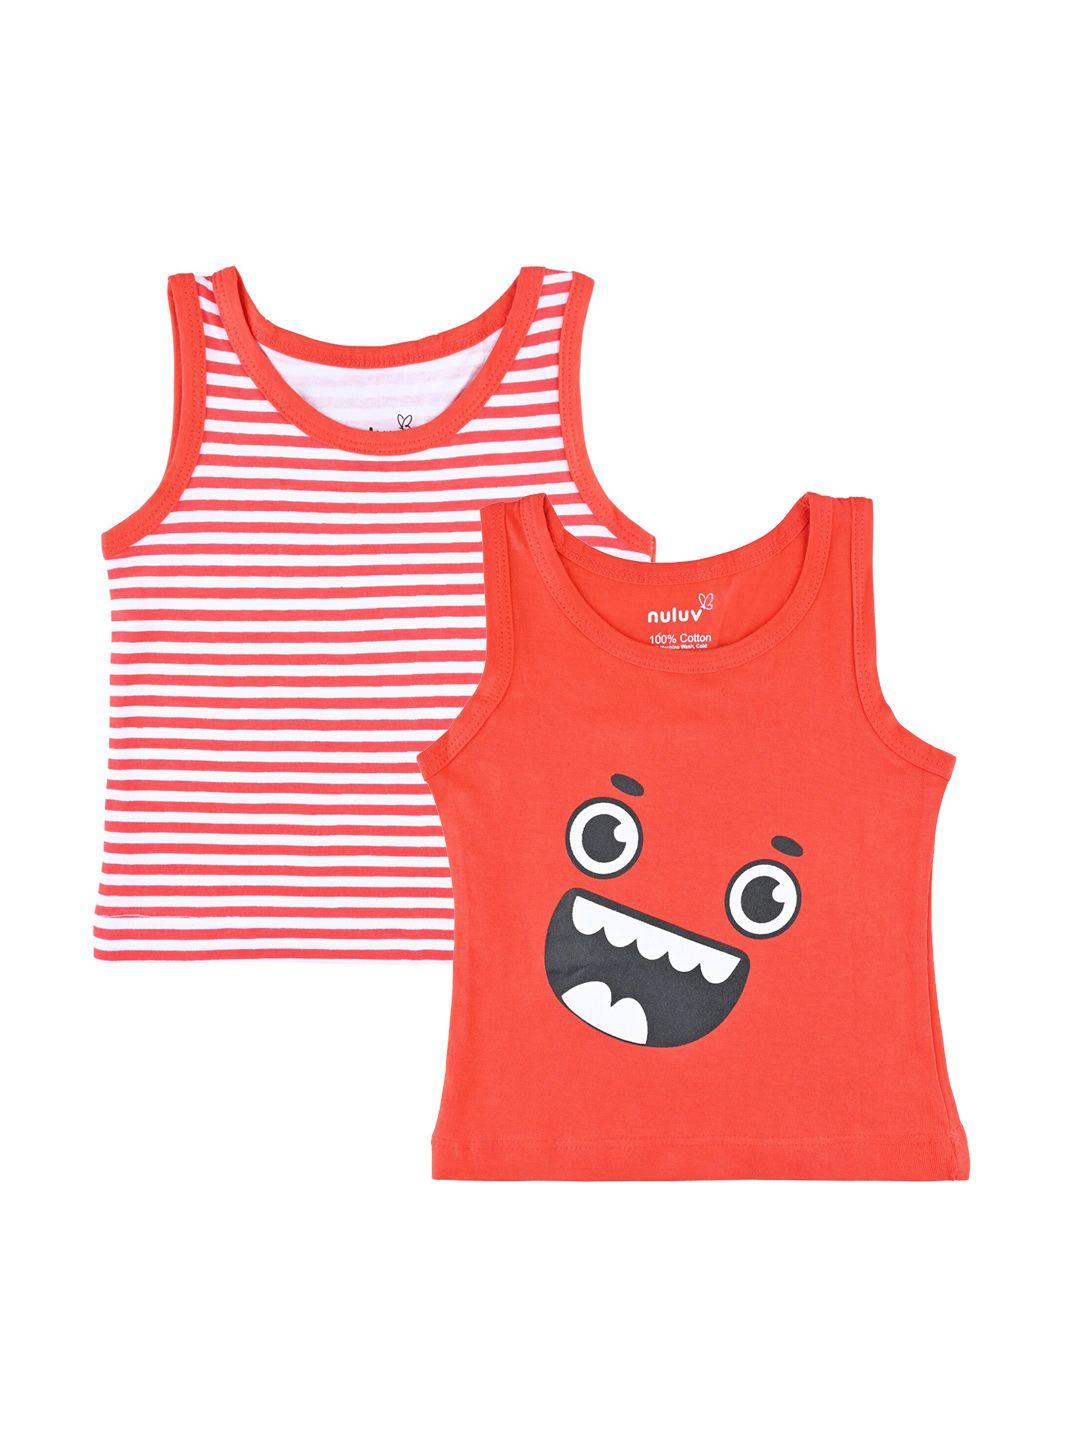 nuluv-boys-pack-of-2-red-&-white-printed-cotton-innerwear-vests